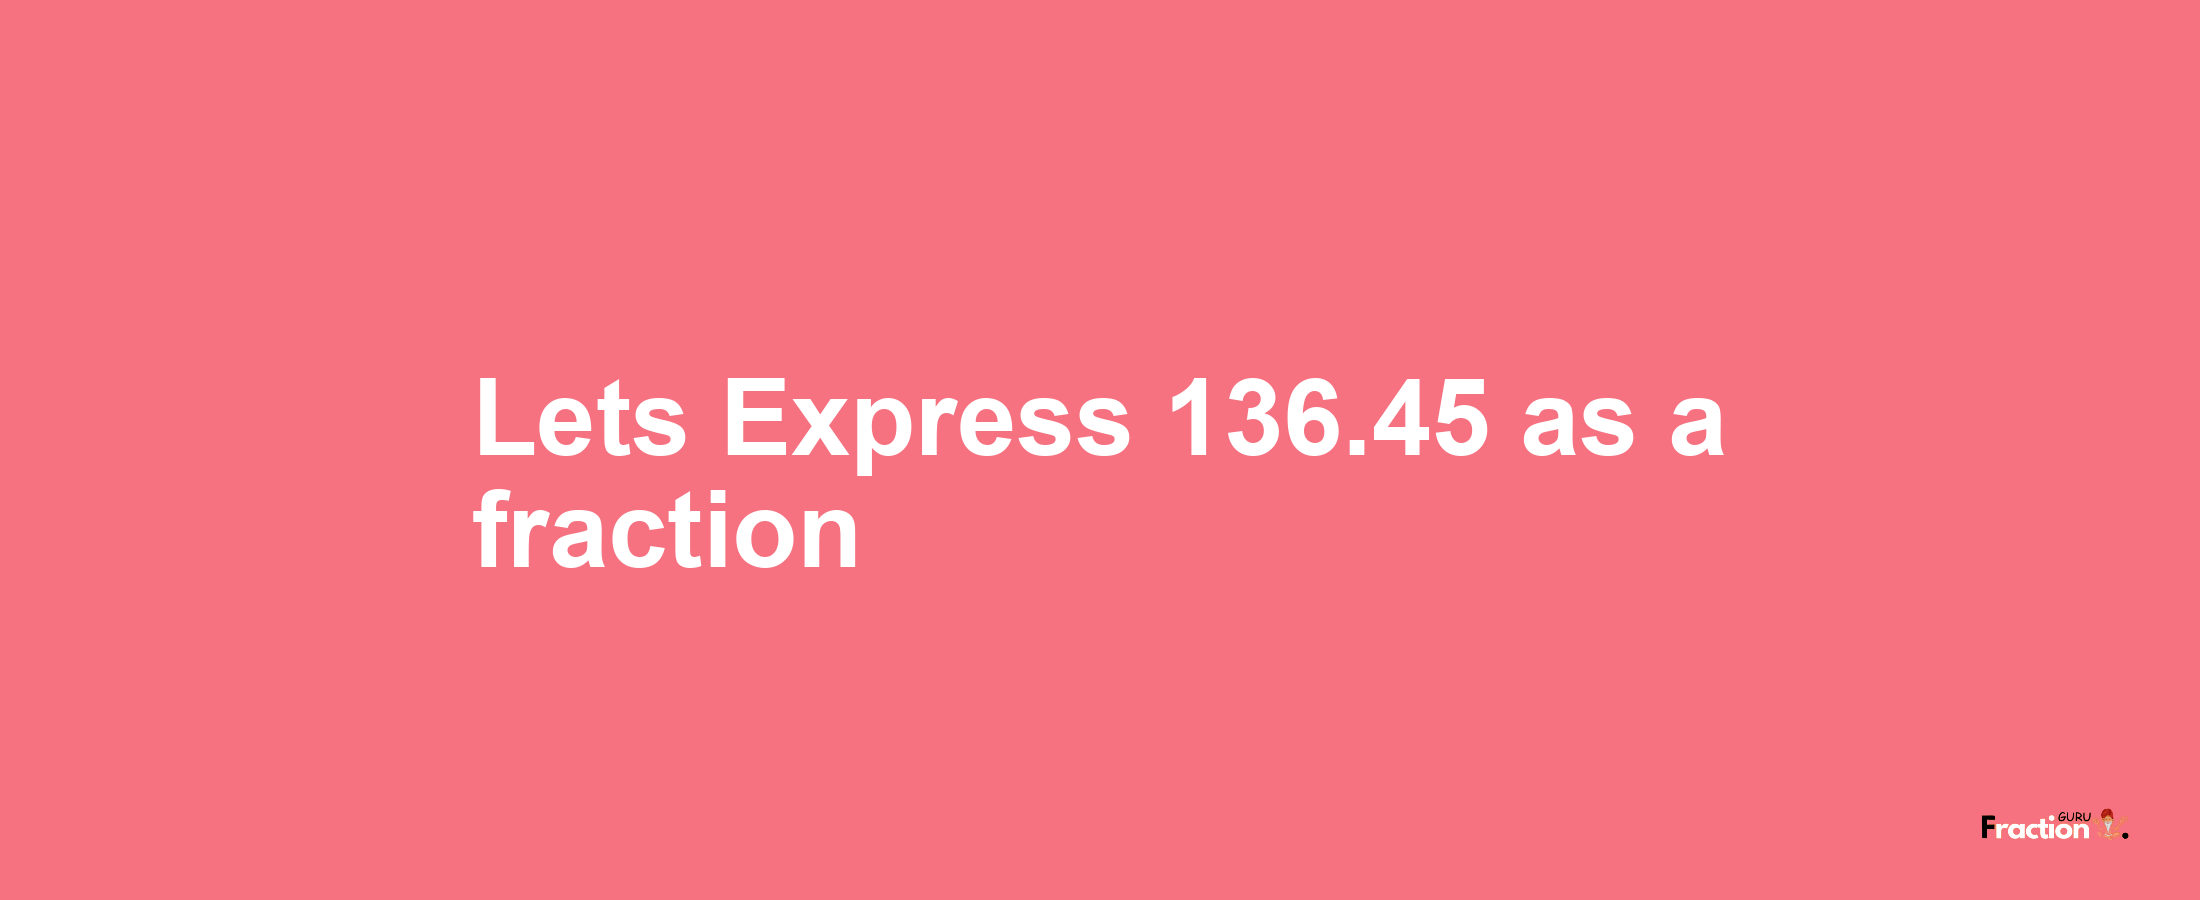 Lets Express 136.45 as afraction